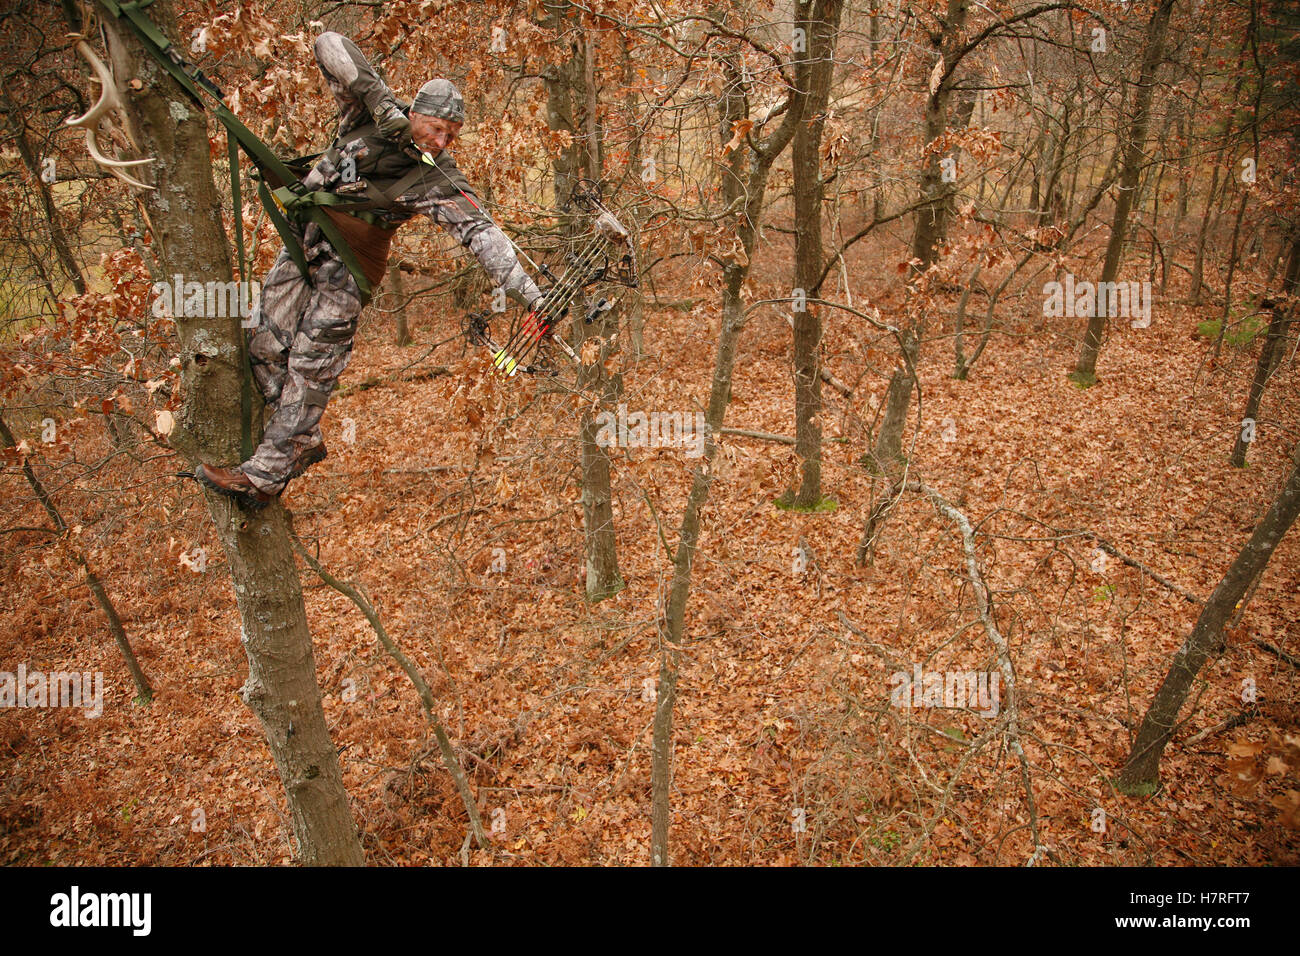 Hunter In Tree Saddle Drawing Compound Bow Stock Photo